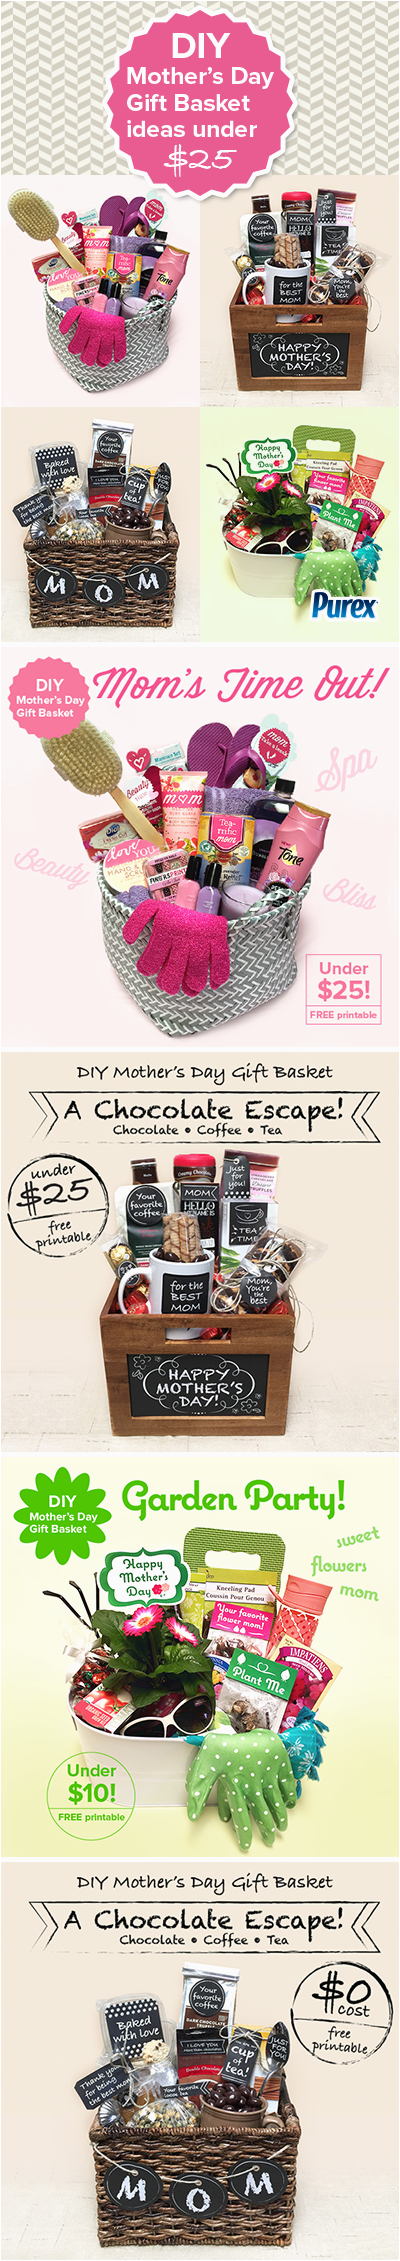 Birthday Gift Ideas for Him Under $25 Diy Mother S Day Gift Basket Ideas Under 25 Gift Ideas